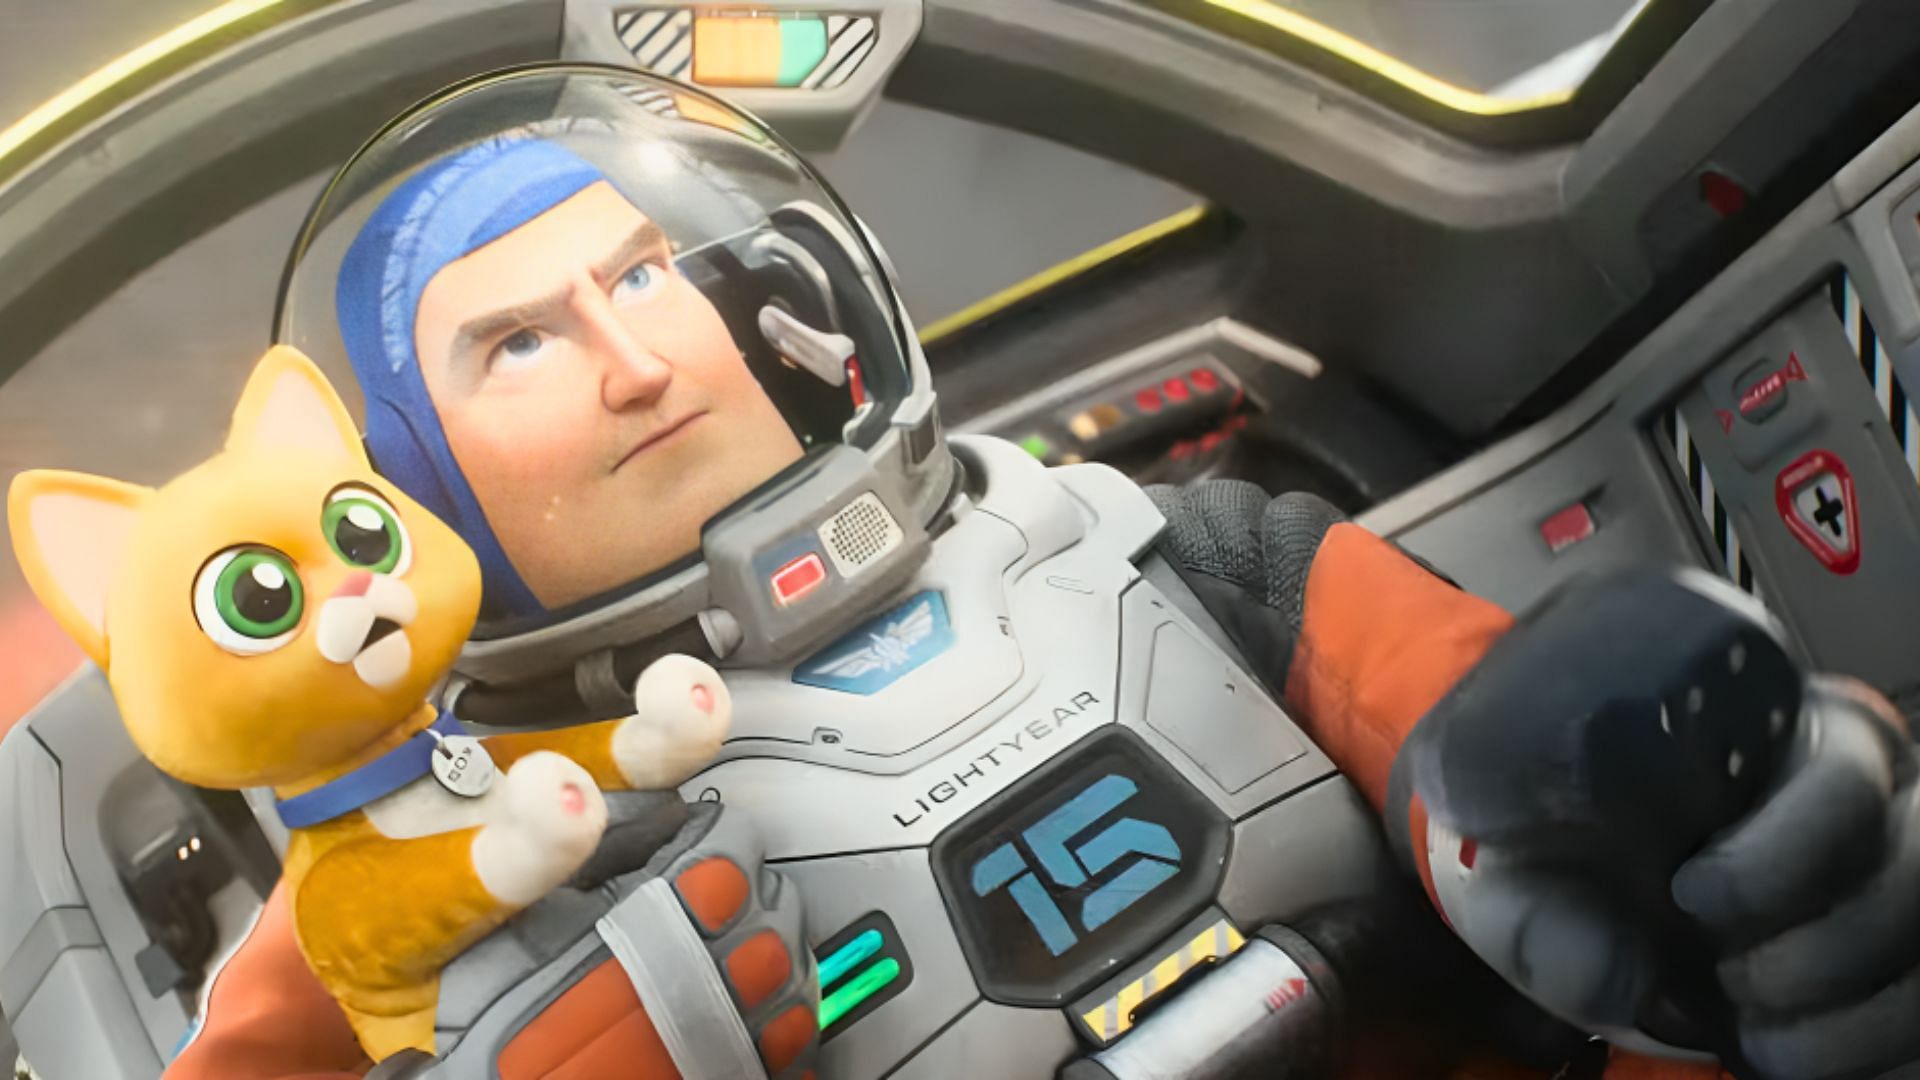 Chris Evans voiced Buzz Lightyear in the 2022 film Lightyear (Image via YouTube/IMAX, 1:14)